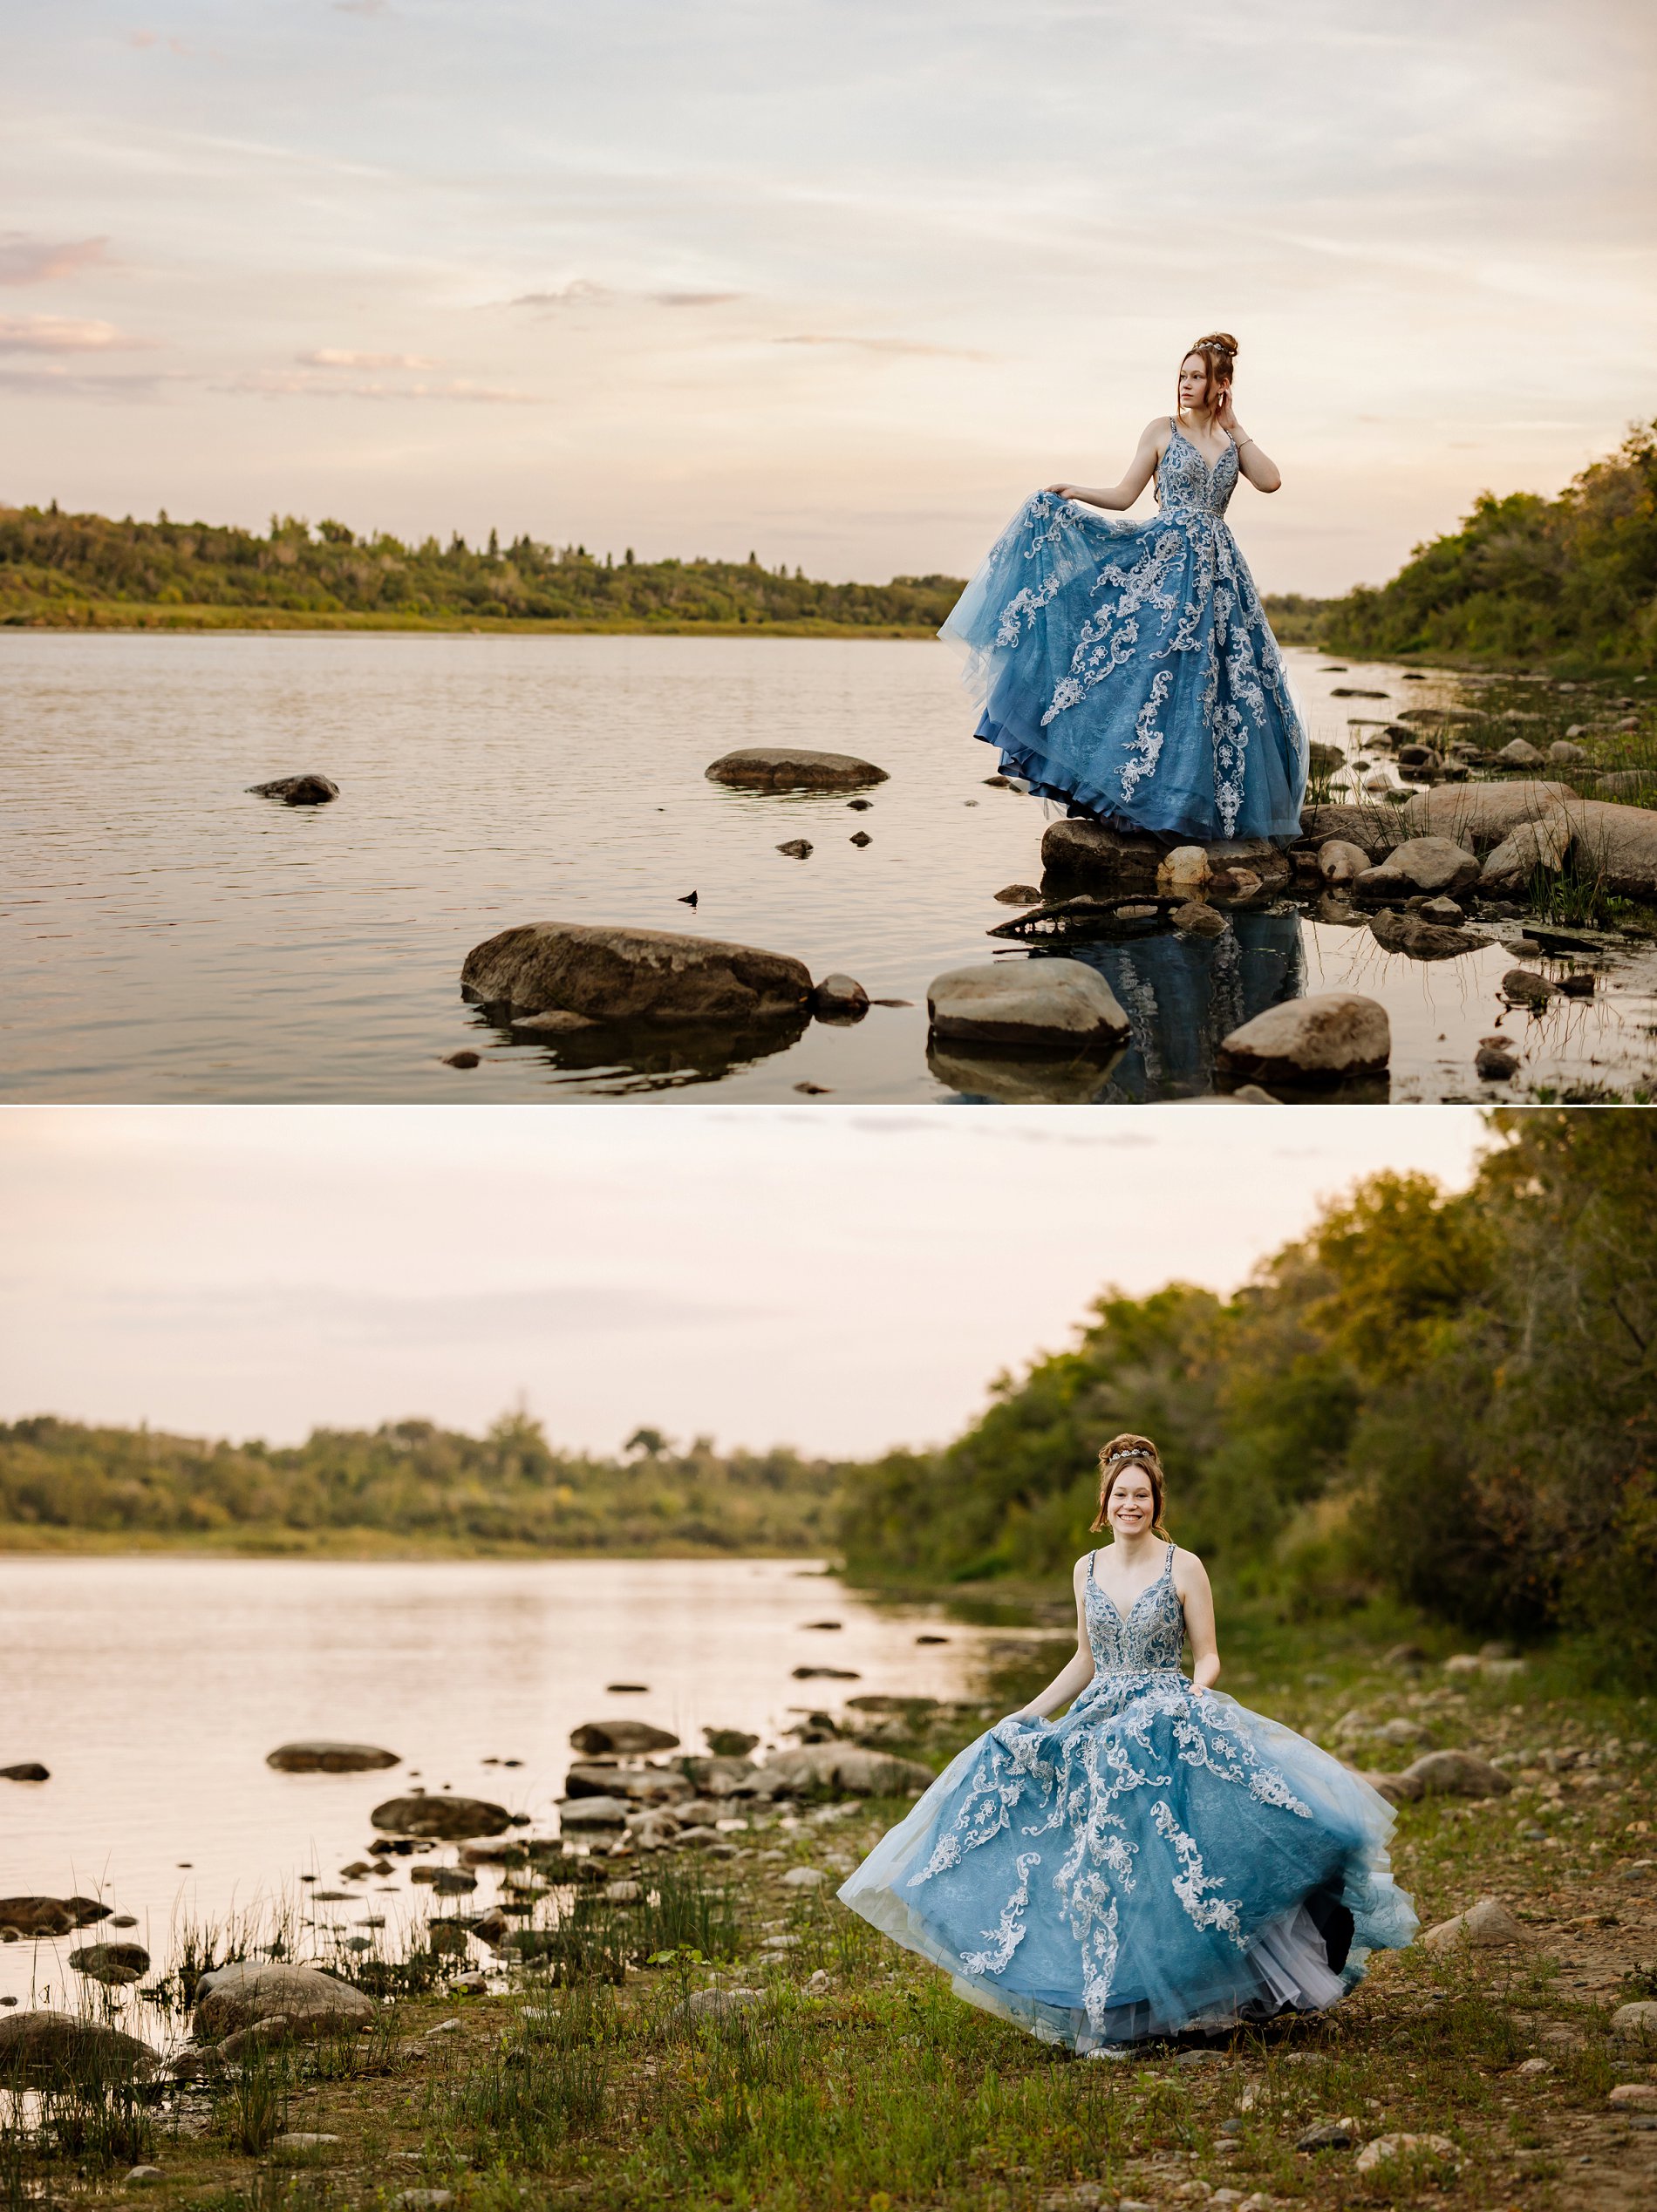 Graduate in a blue ball gown and tiara poses for her grad portraits on the river bank in downtown Saskatoon.